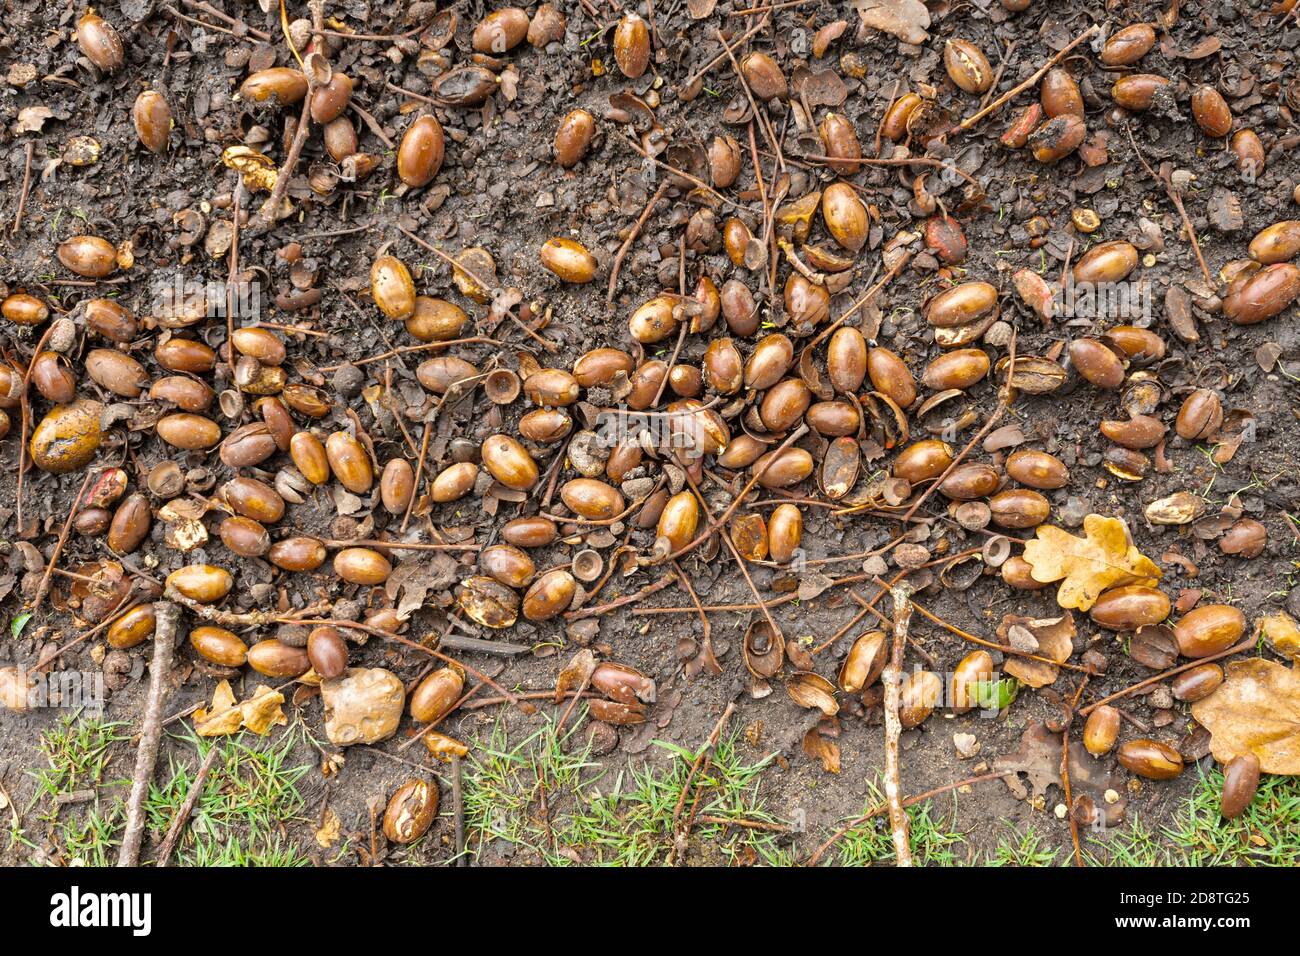 Lots of fallen acorns under an english oak tree during a mast year, autumn 2020. Bumper year for acorns. Stock Photo